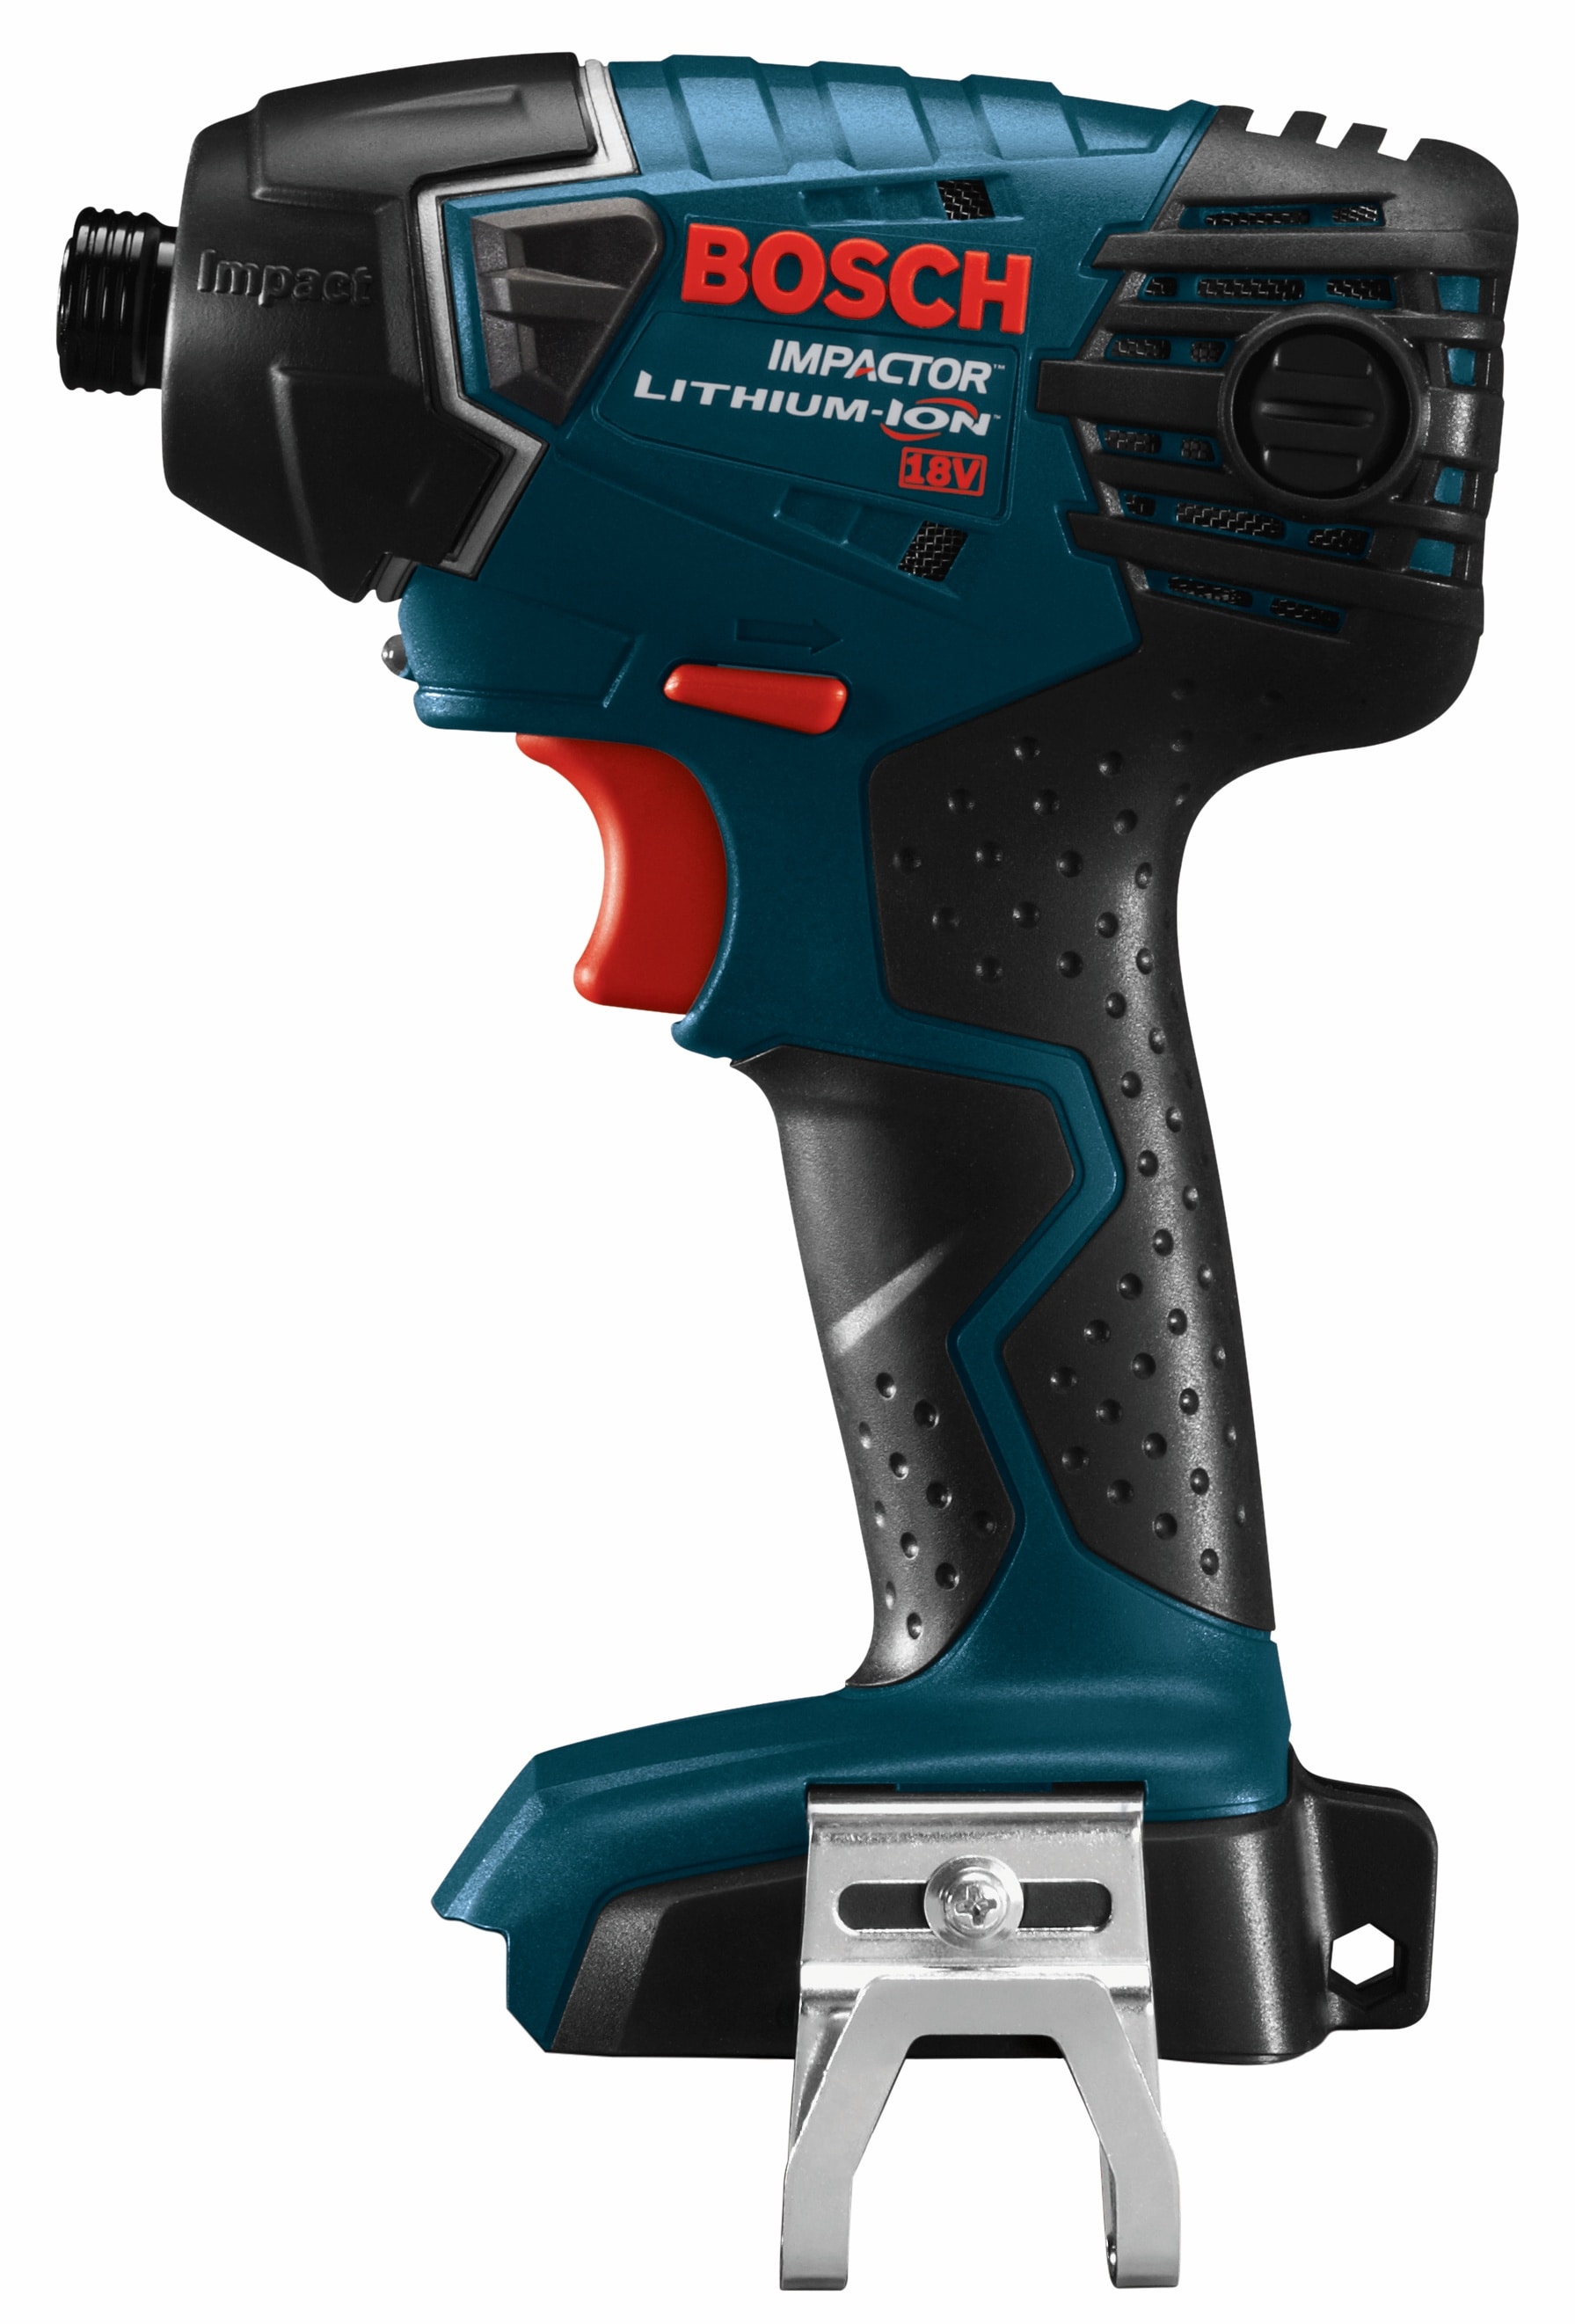 Bosch 25618 Impactor 18 V 1/4 In BRAND NEW BARE TOOL Hex Impact Driver 